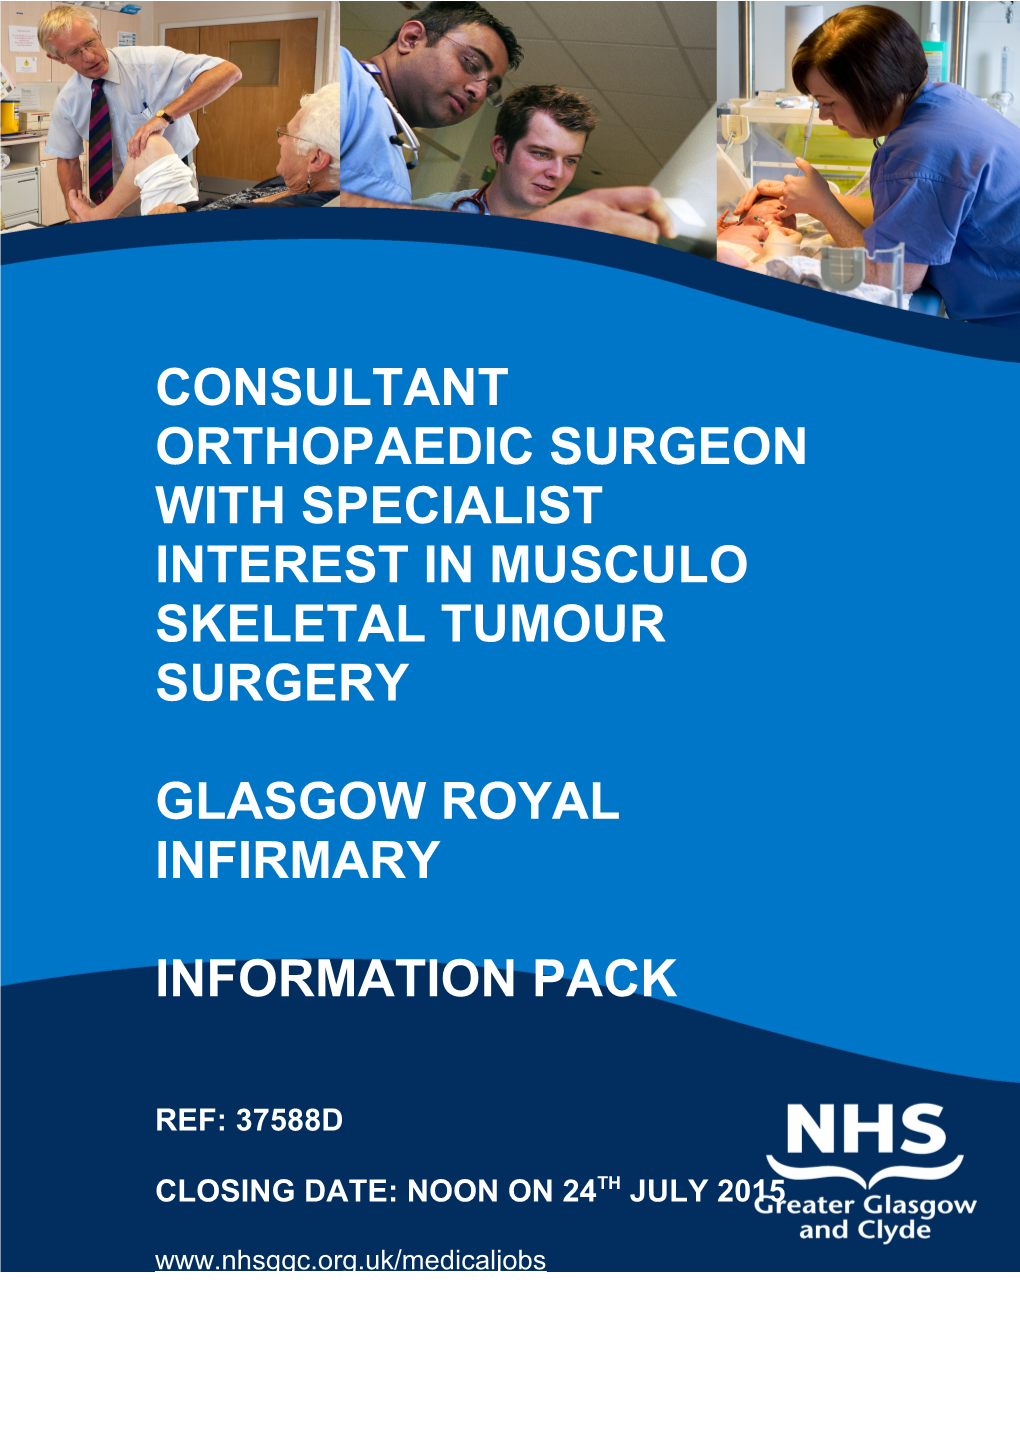 With Specialist Interest in Musculo Skeletal Tumour Surgery